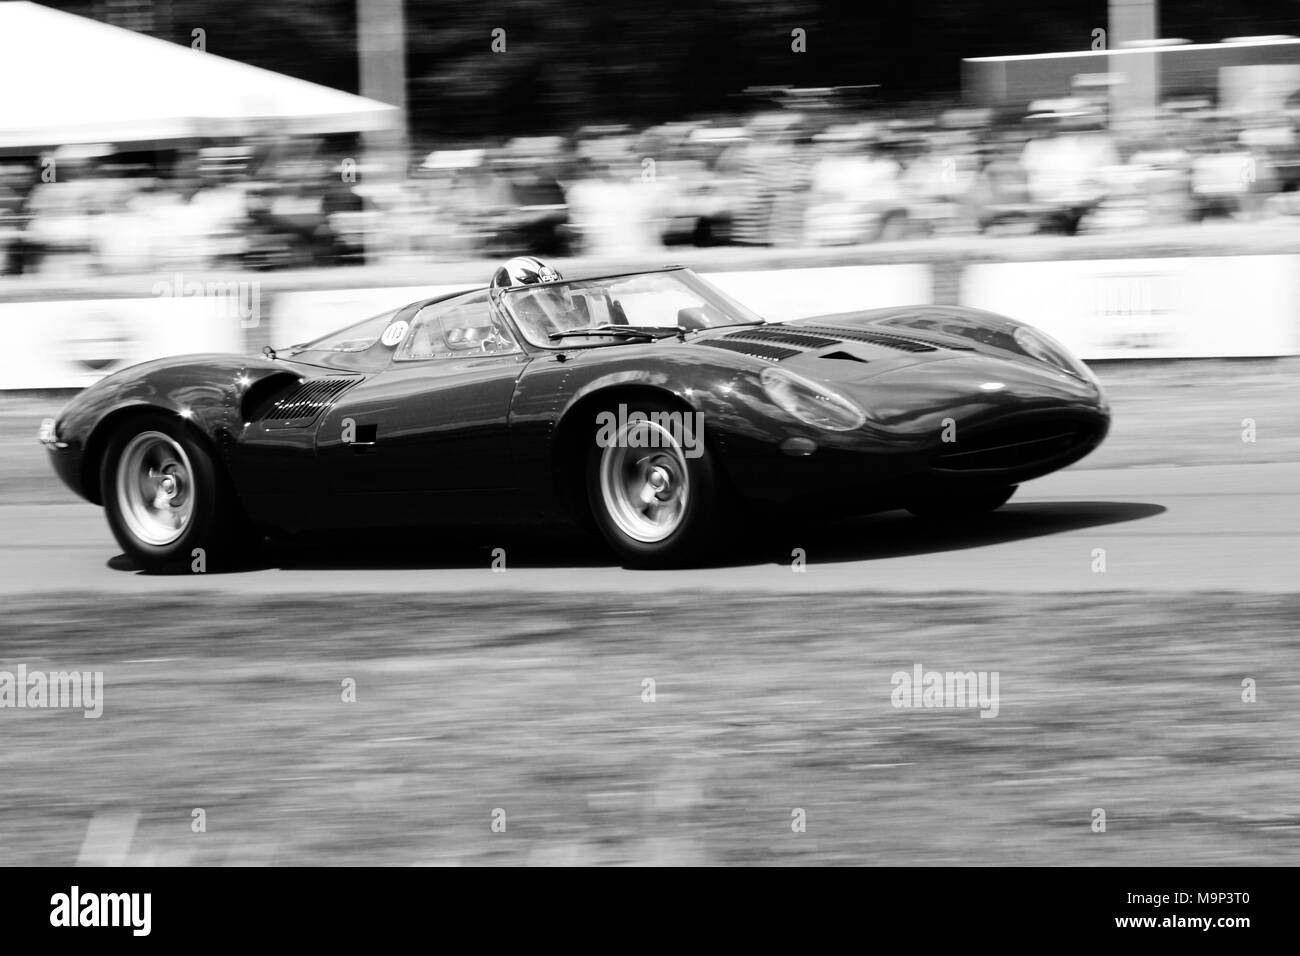 The Jaguar XJ13 racing at Goodwood Festival of Speed in 2009. This is the ONLY Jaguar XJ 13 because only one was ever produced. Mid 1960s Le Mans car. Stock Photo